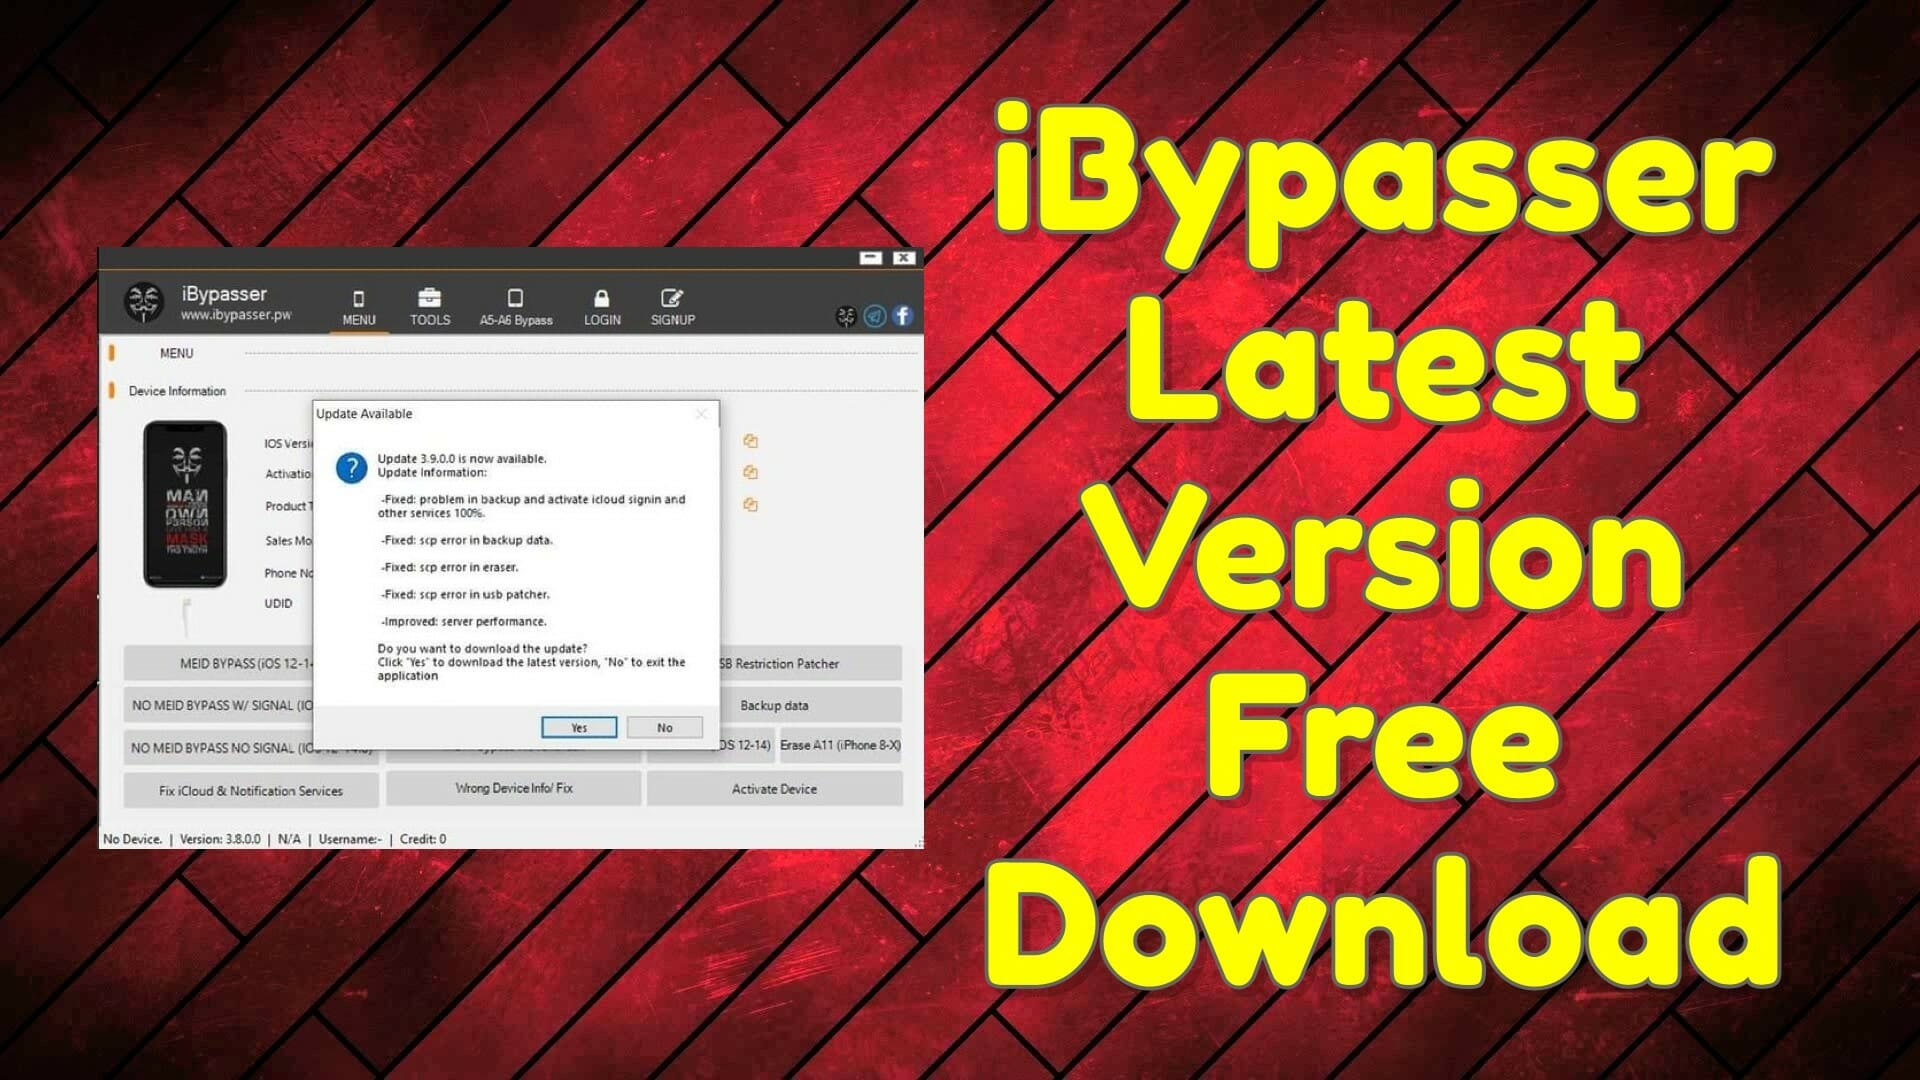 iBypasser v4.0 Setup iCloud Bypass Tool Update Free Tool